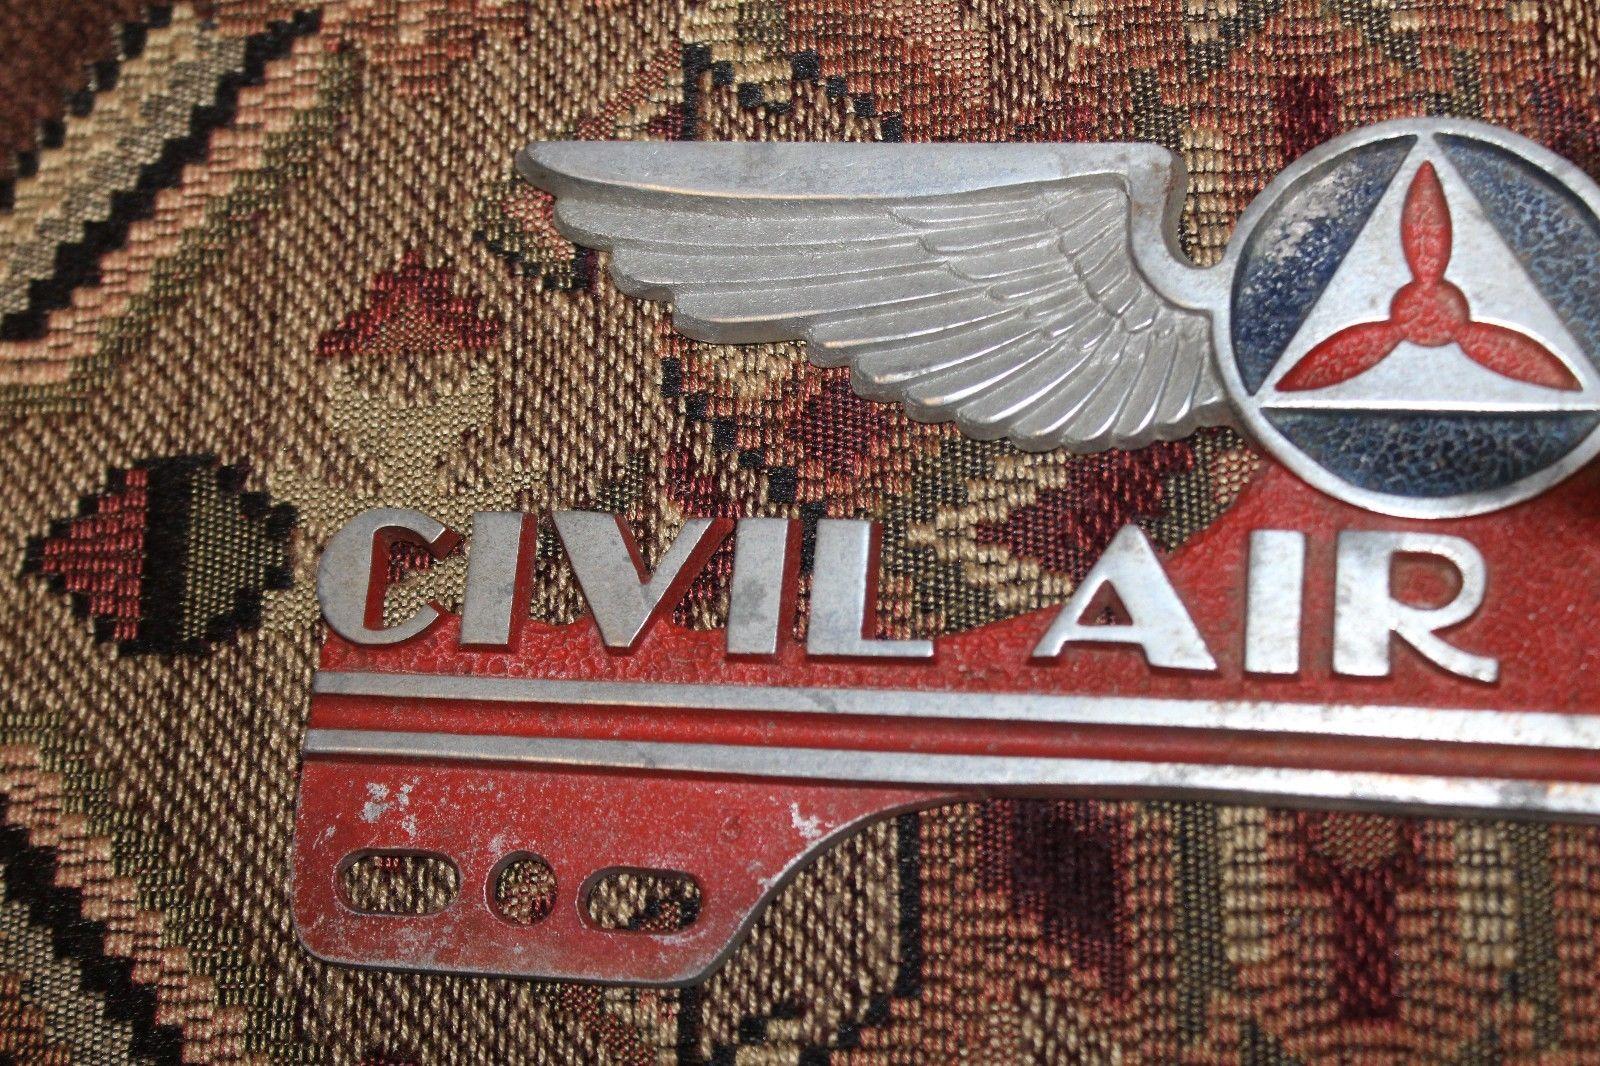 Mid-20th Century 1940s-1950s Civil Air Patrol License Plate Topper For Sale